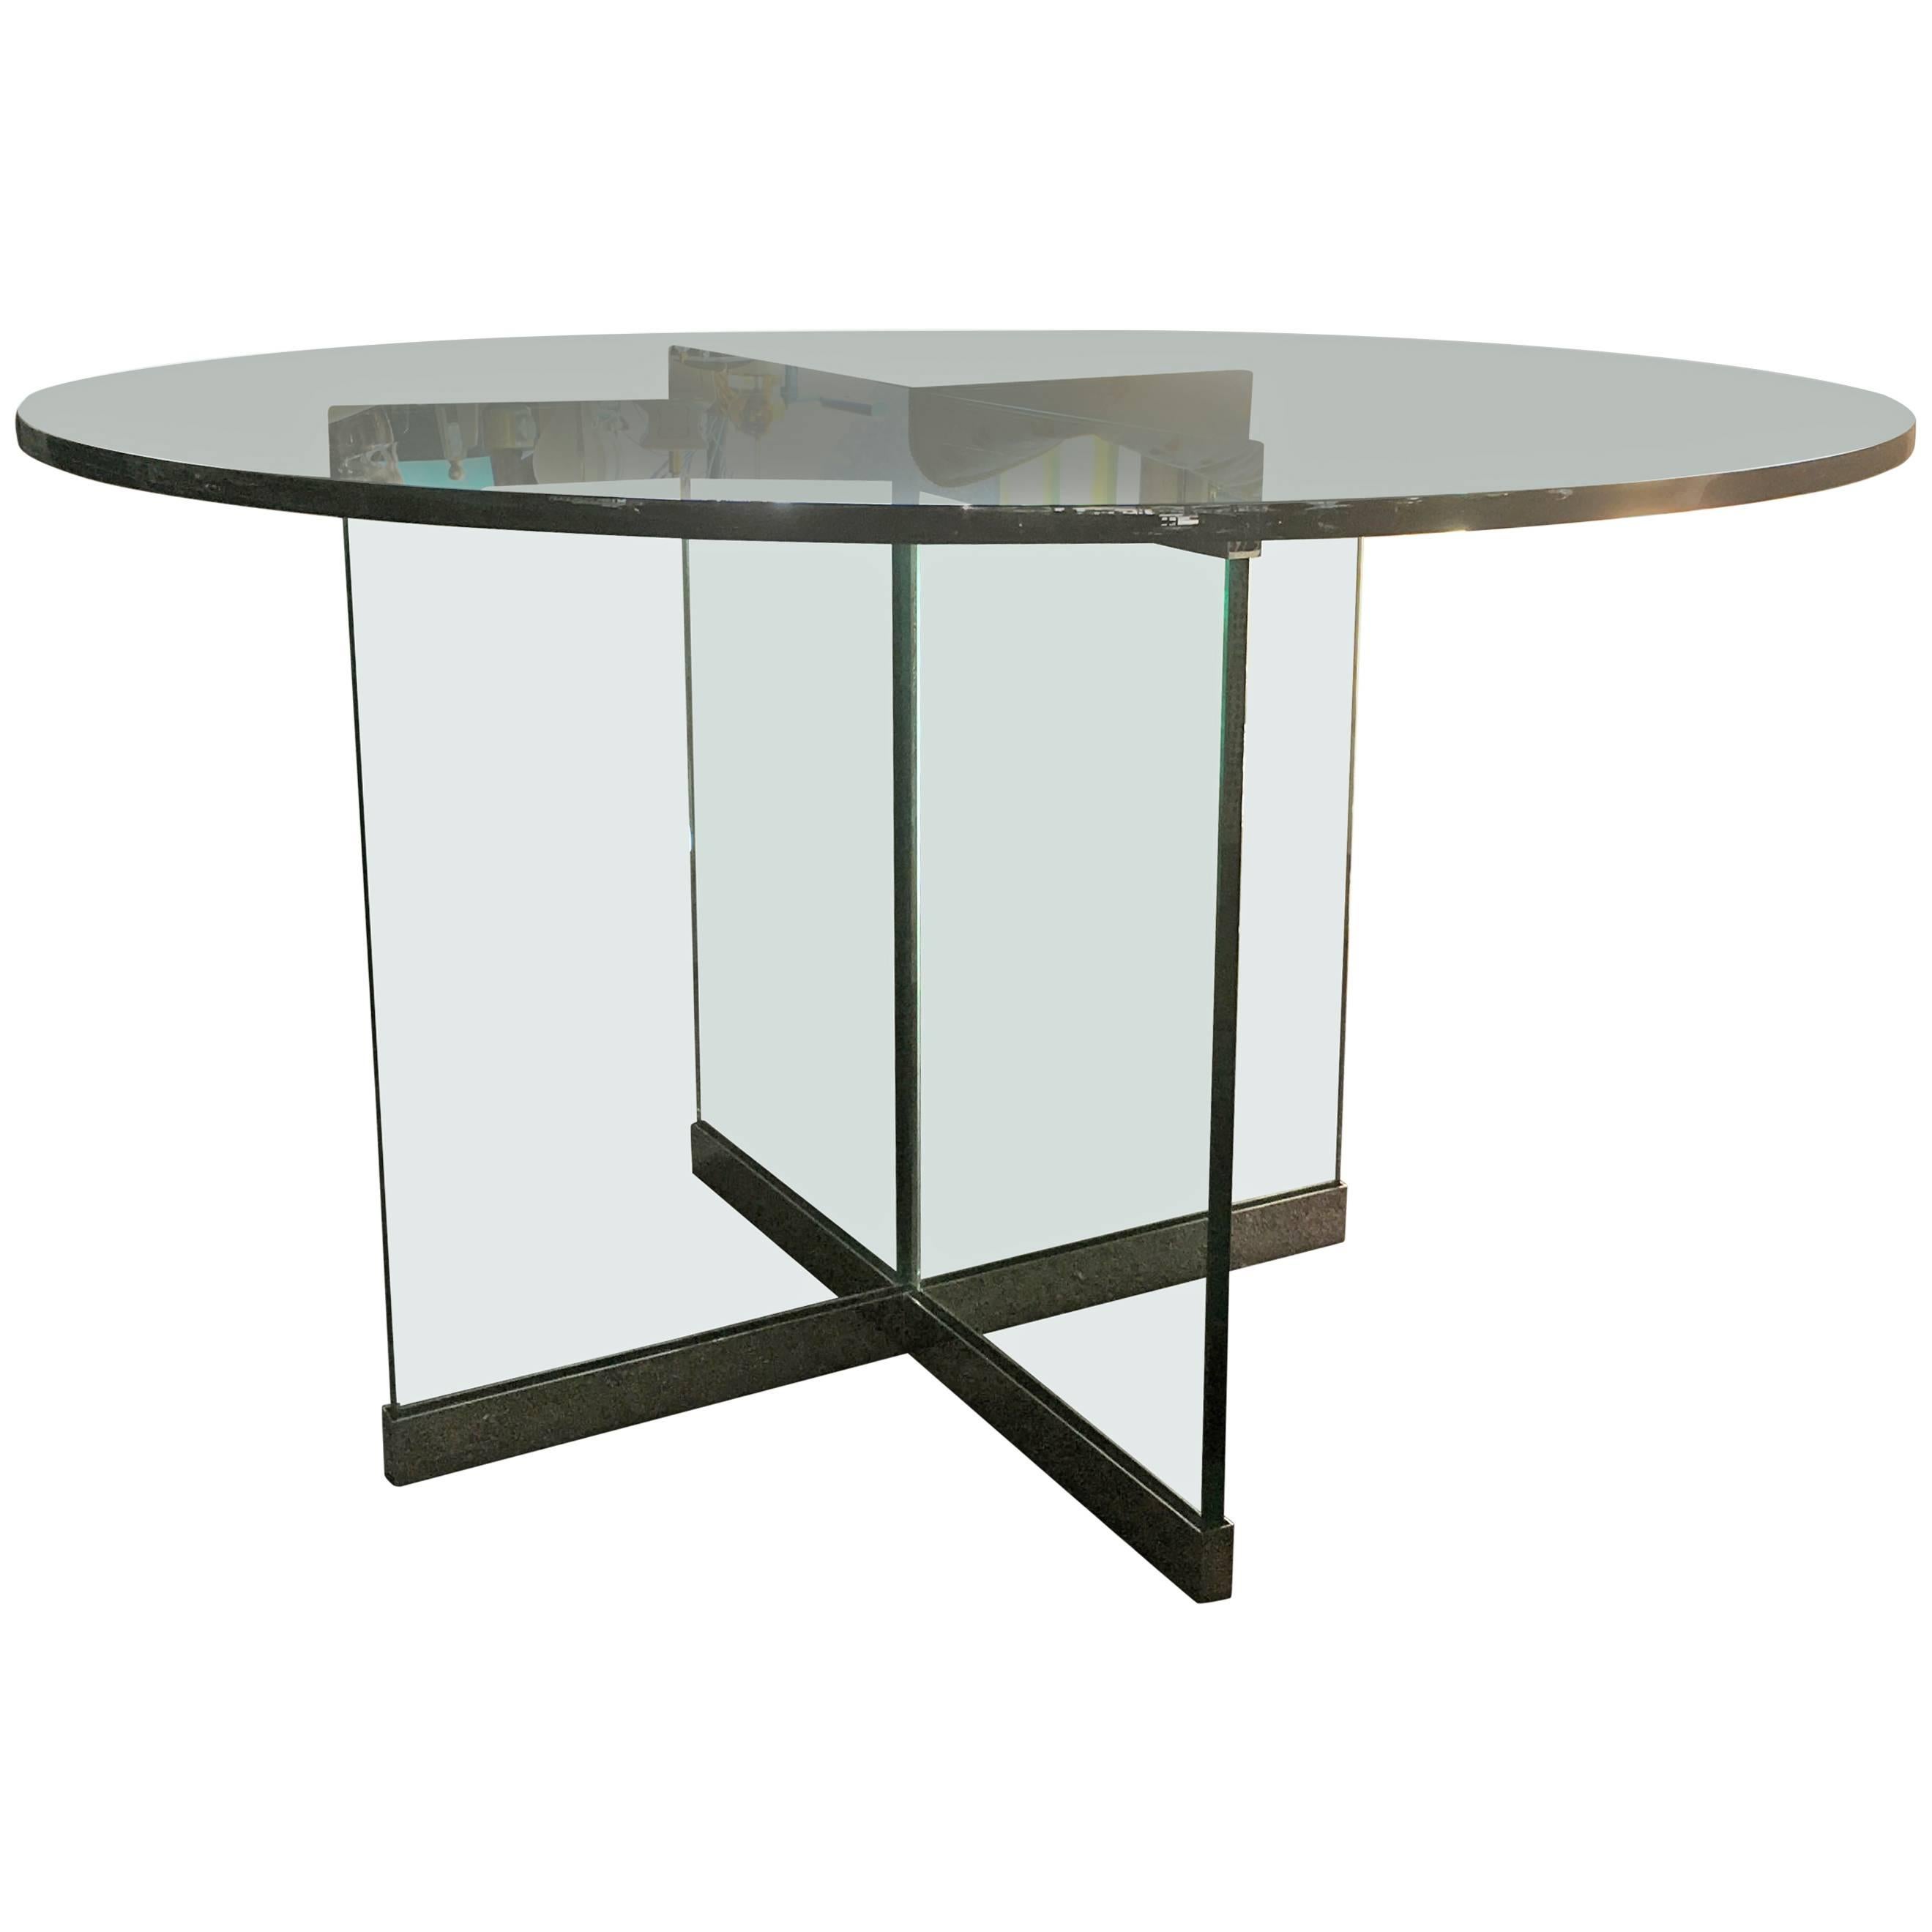 1970s Pace Thick Glass and Chrome Architecturally Modern Game/Dining Table